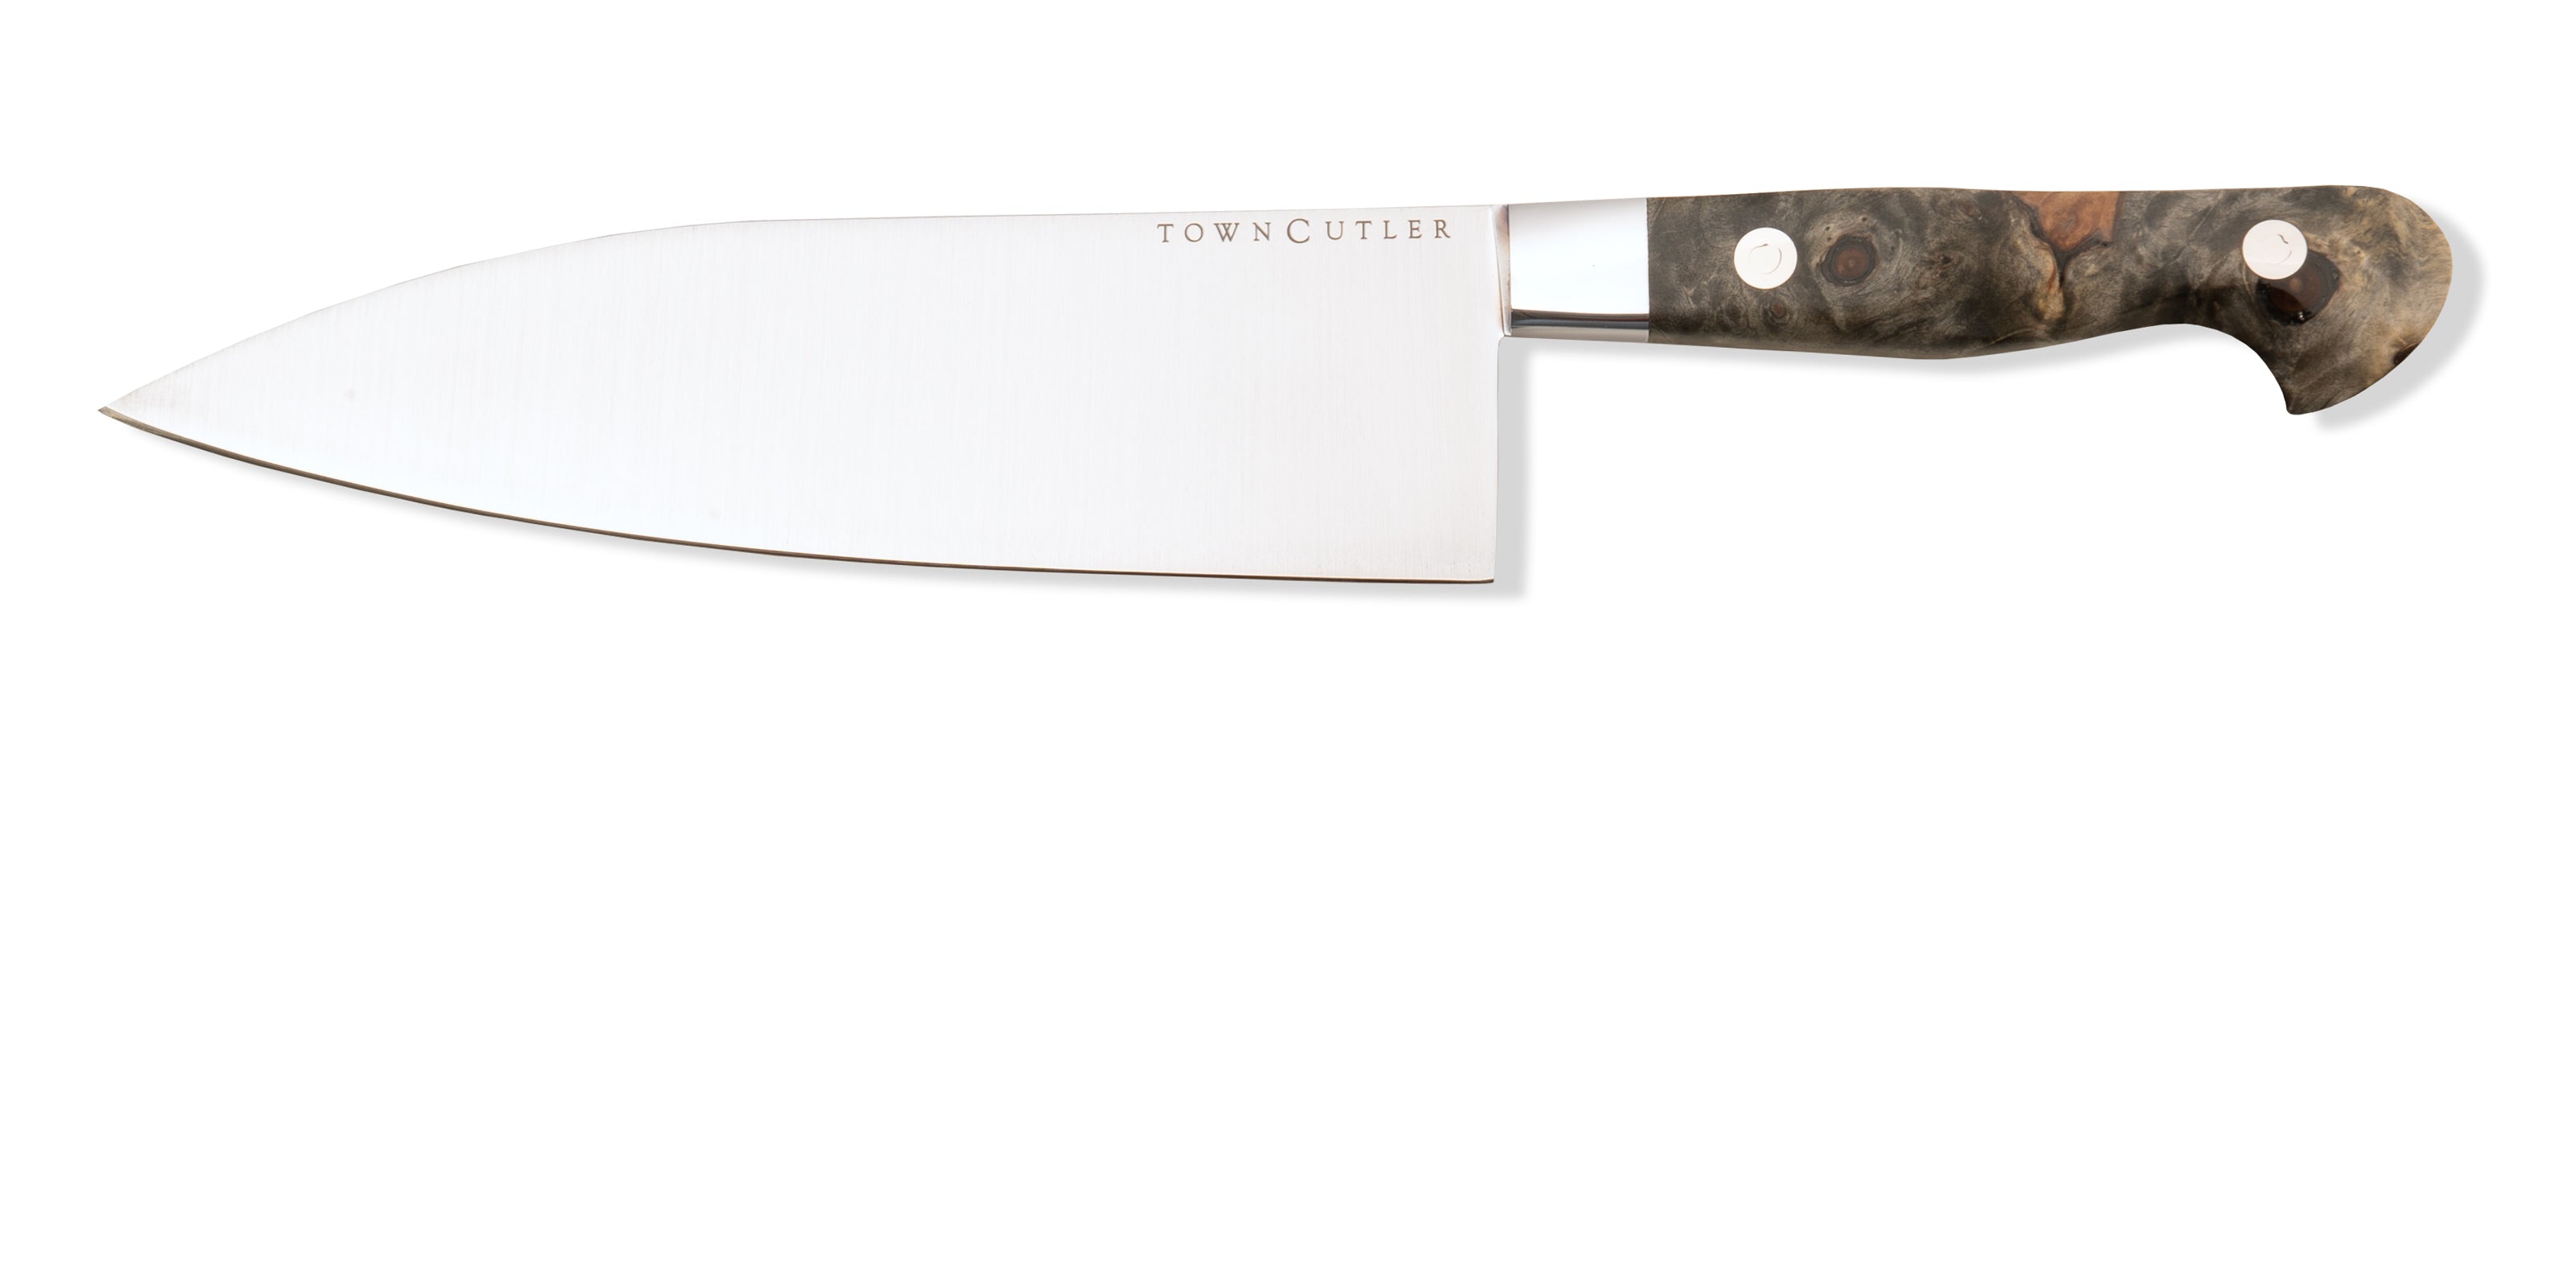 Town Cutler Classic Chef Knife.